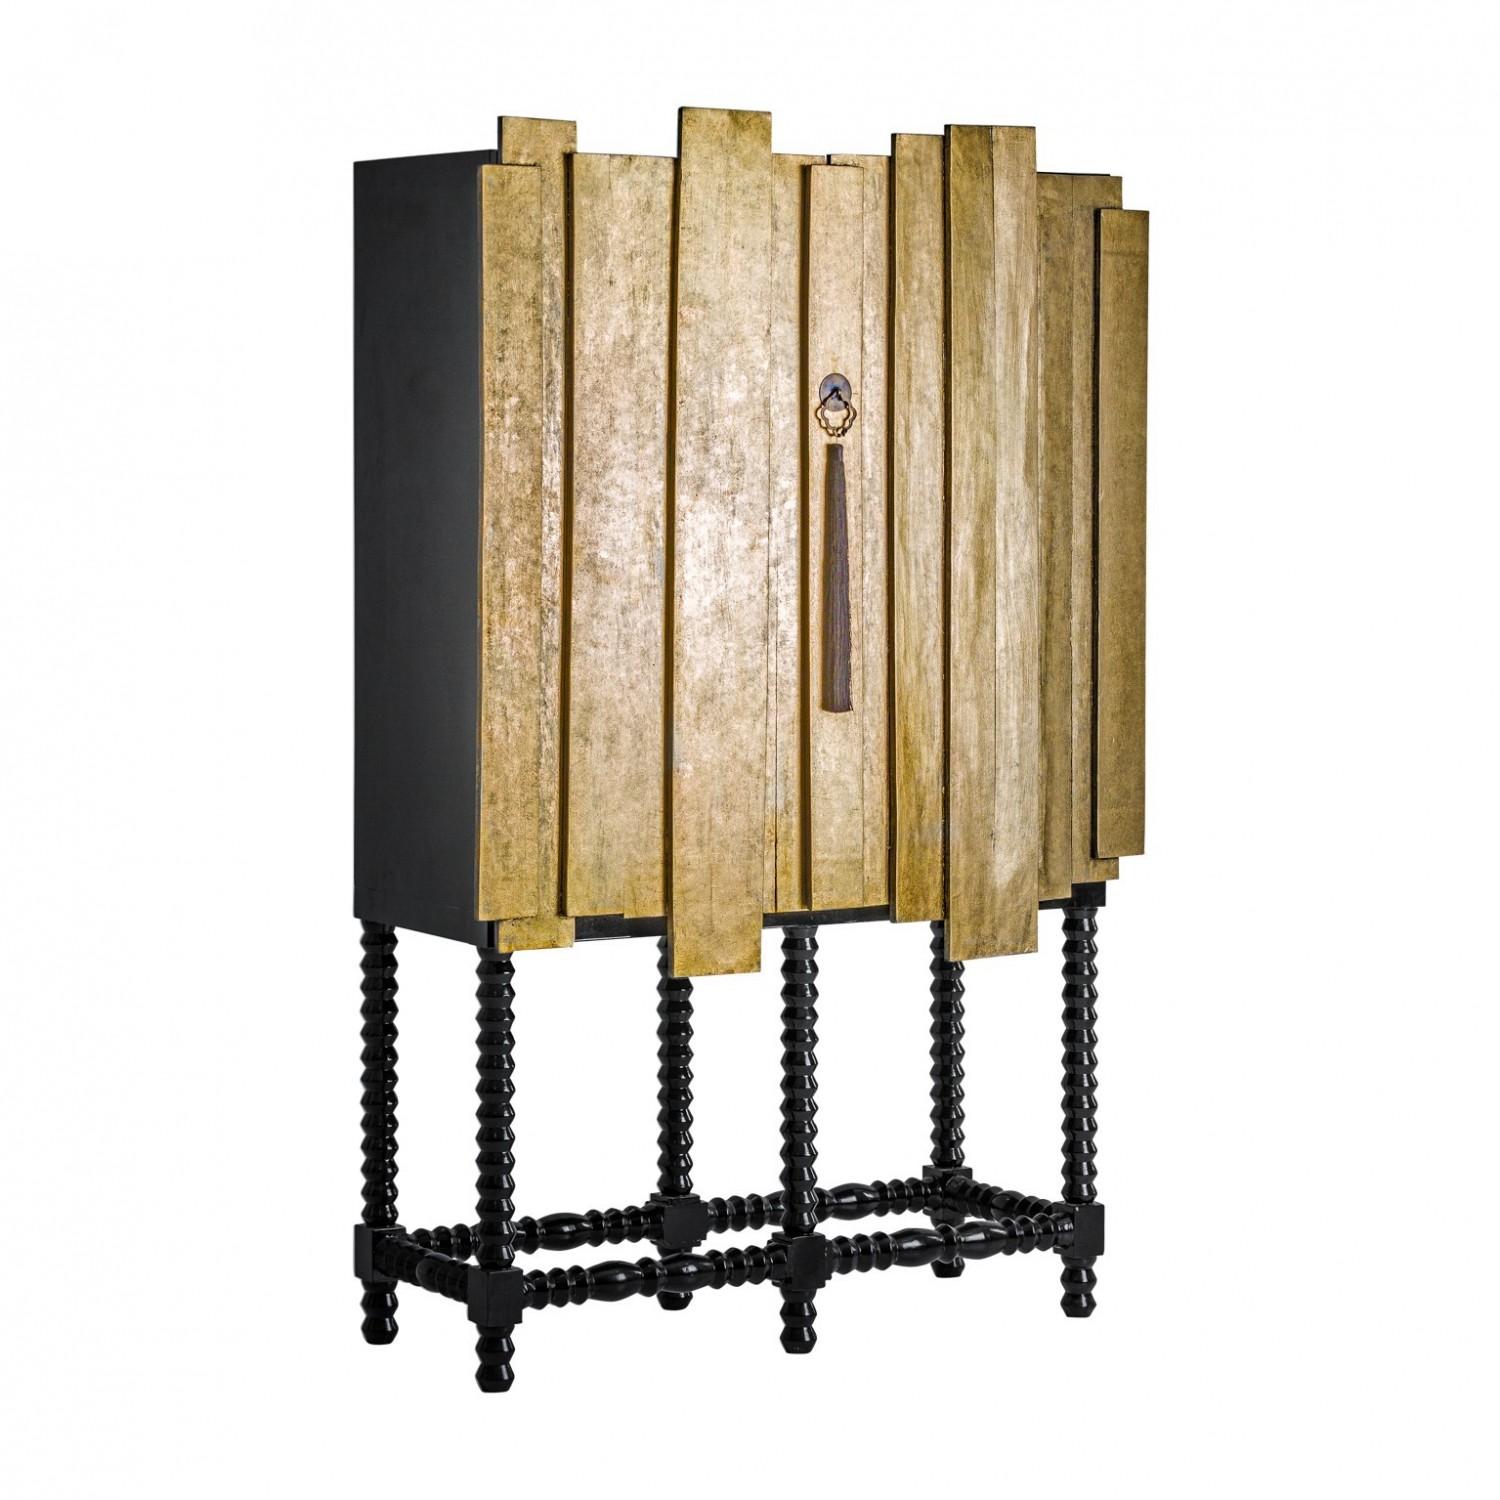 Black and Gold Patina Wooden Cabinet